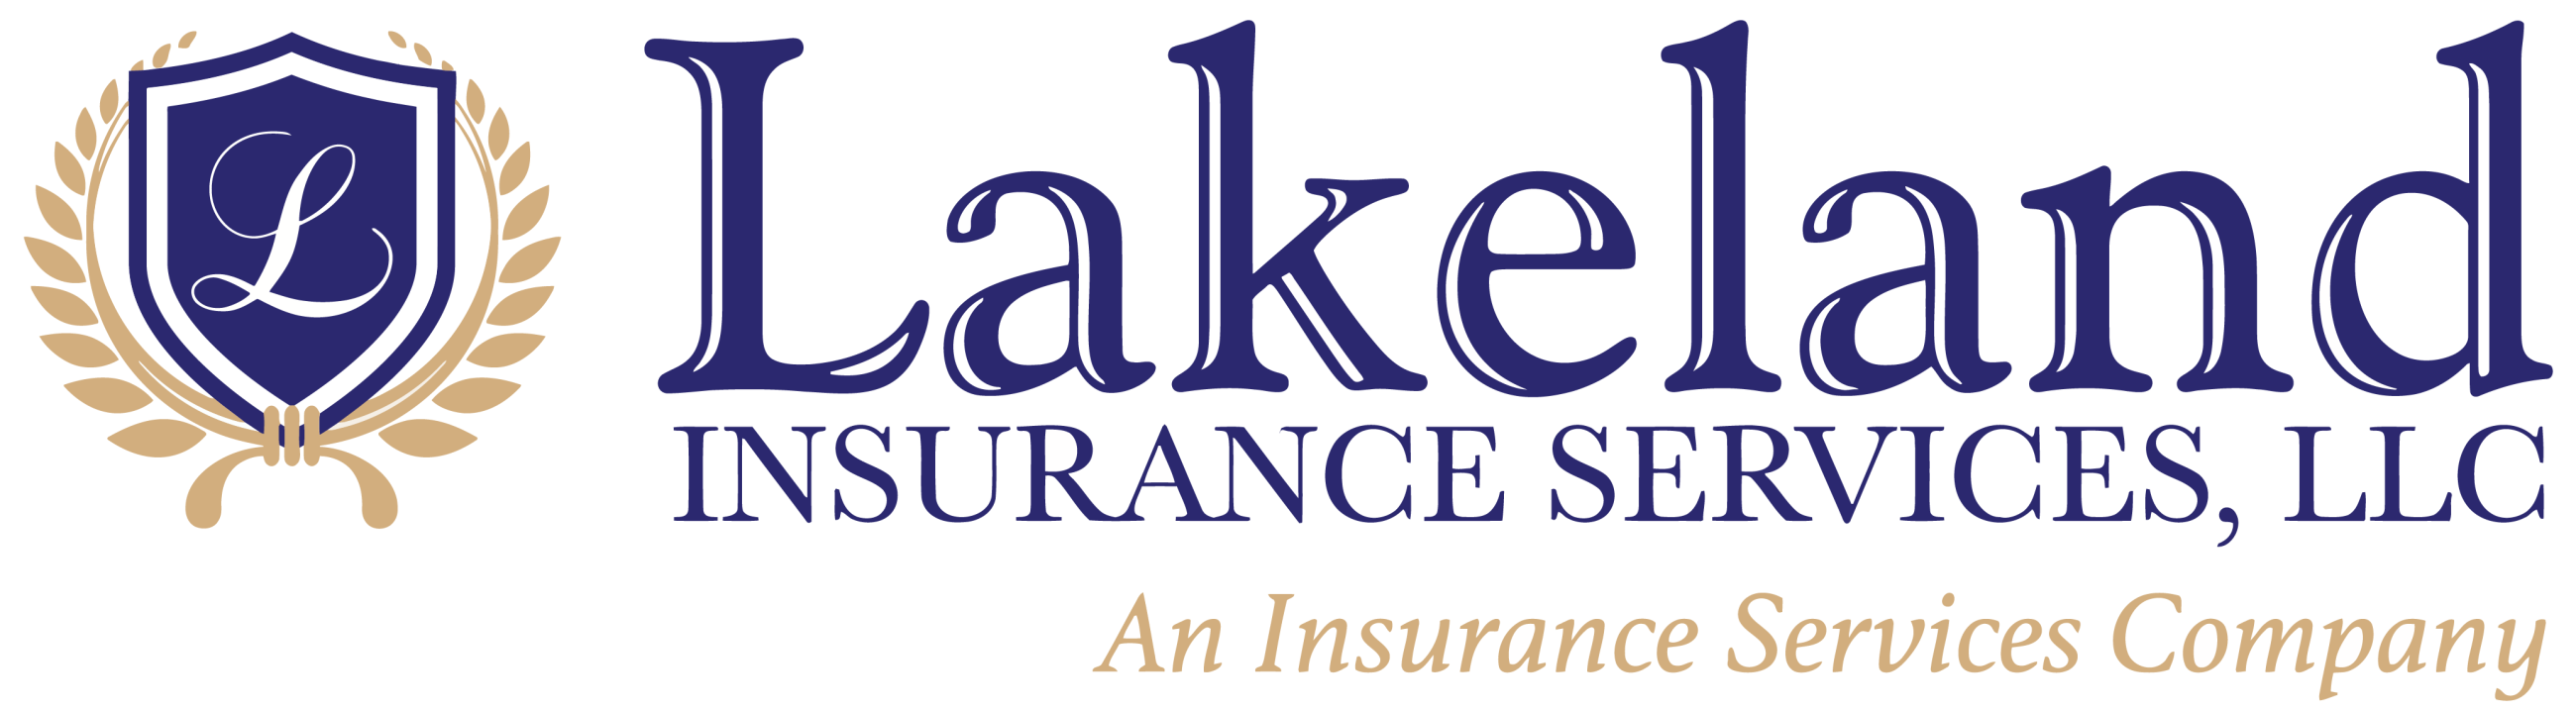 Our Services | Lakeland Insurance Services, LLC